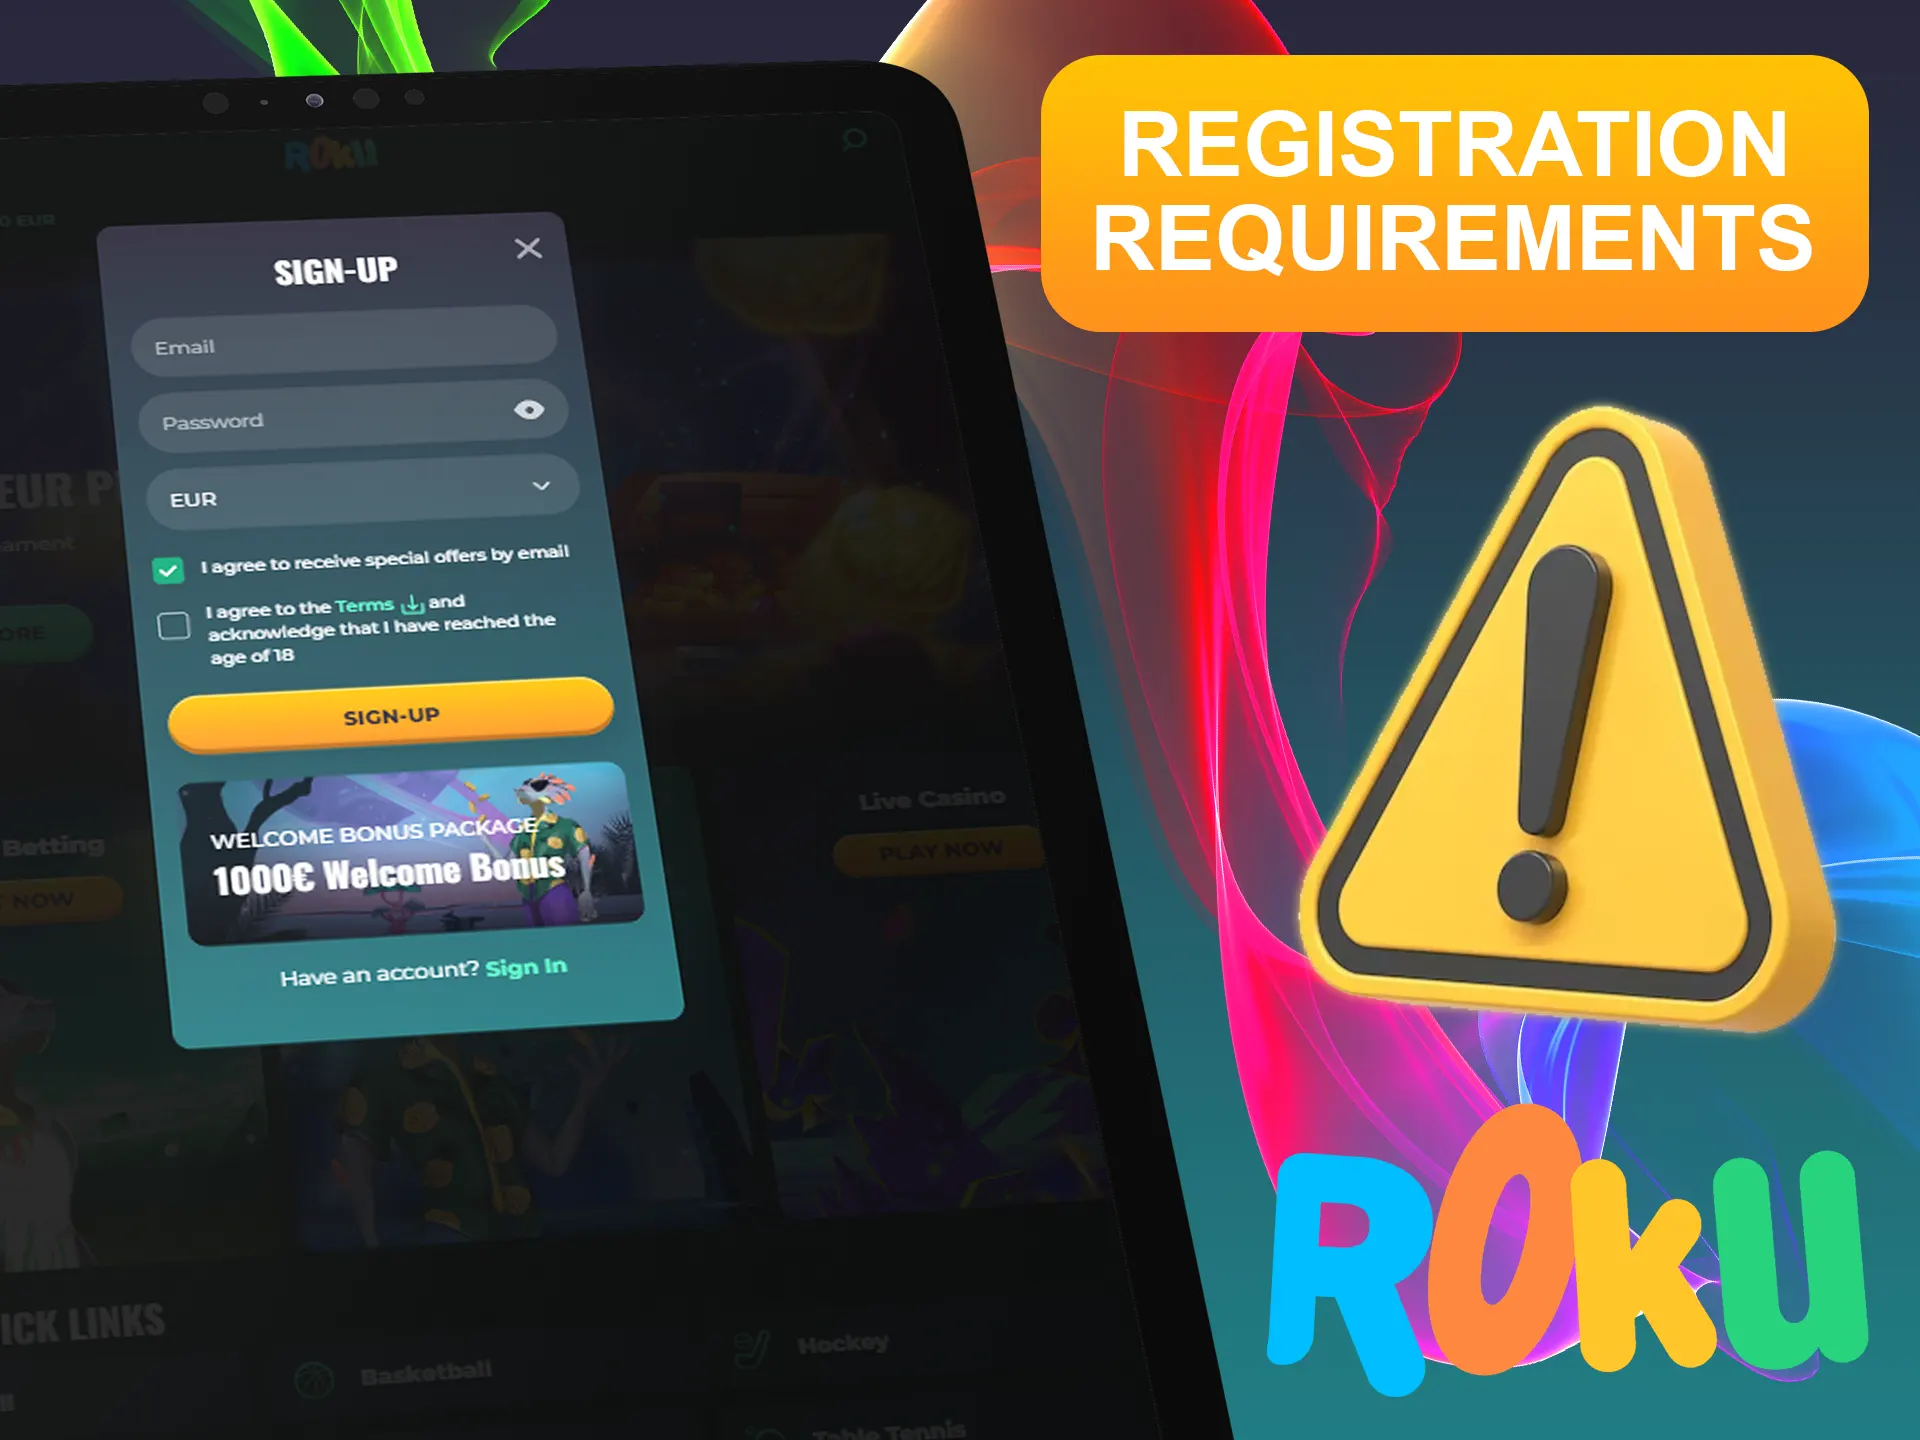 Follow all of the Rokubet recomendations for make your own account.